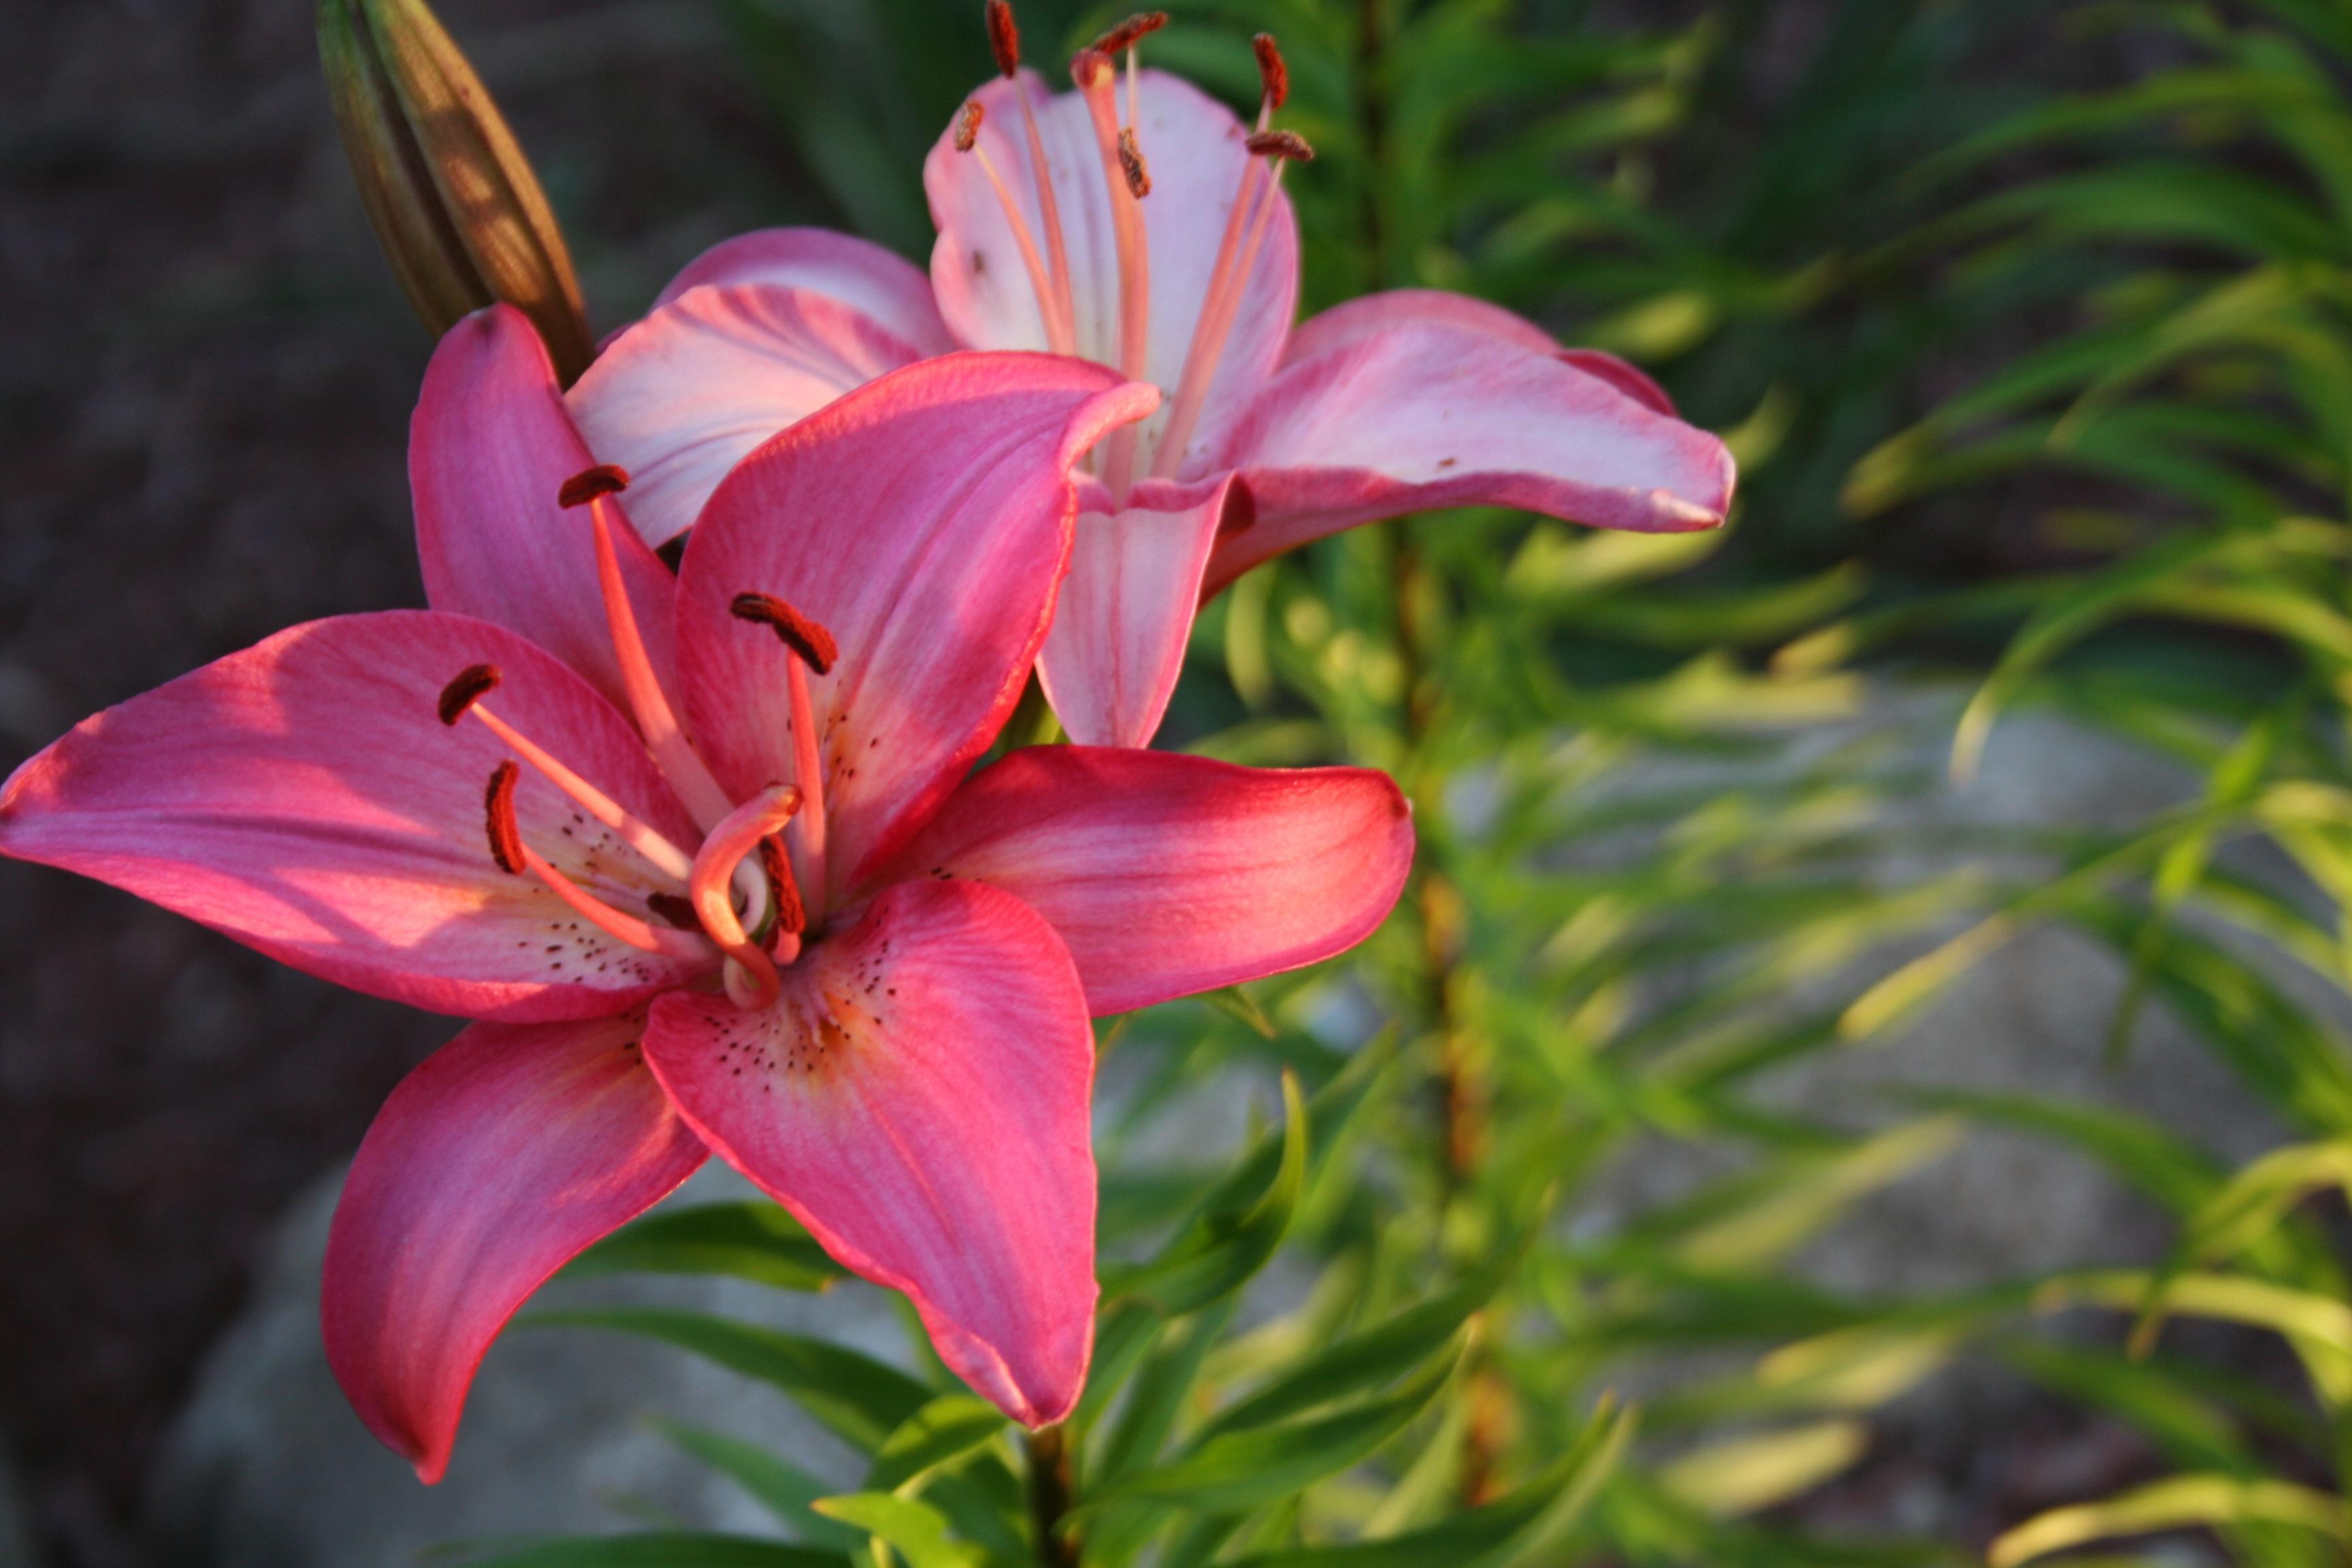 V.24: Picture Of Lilies, HD Image of Lilies, Ultra HD 4K Lilies